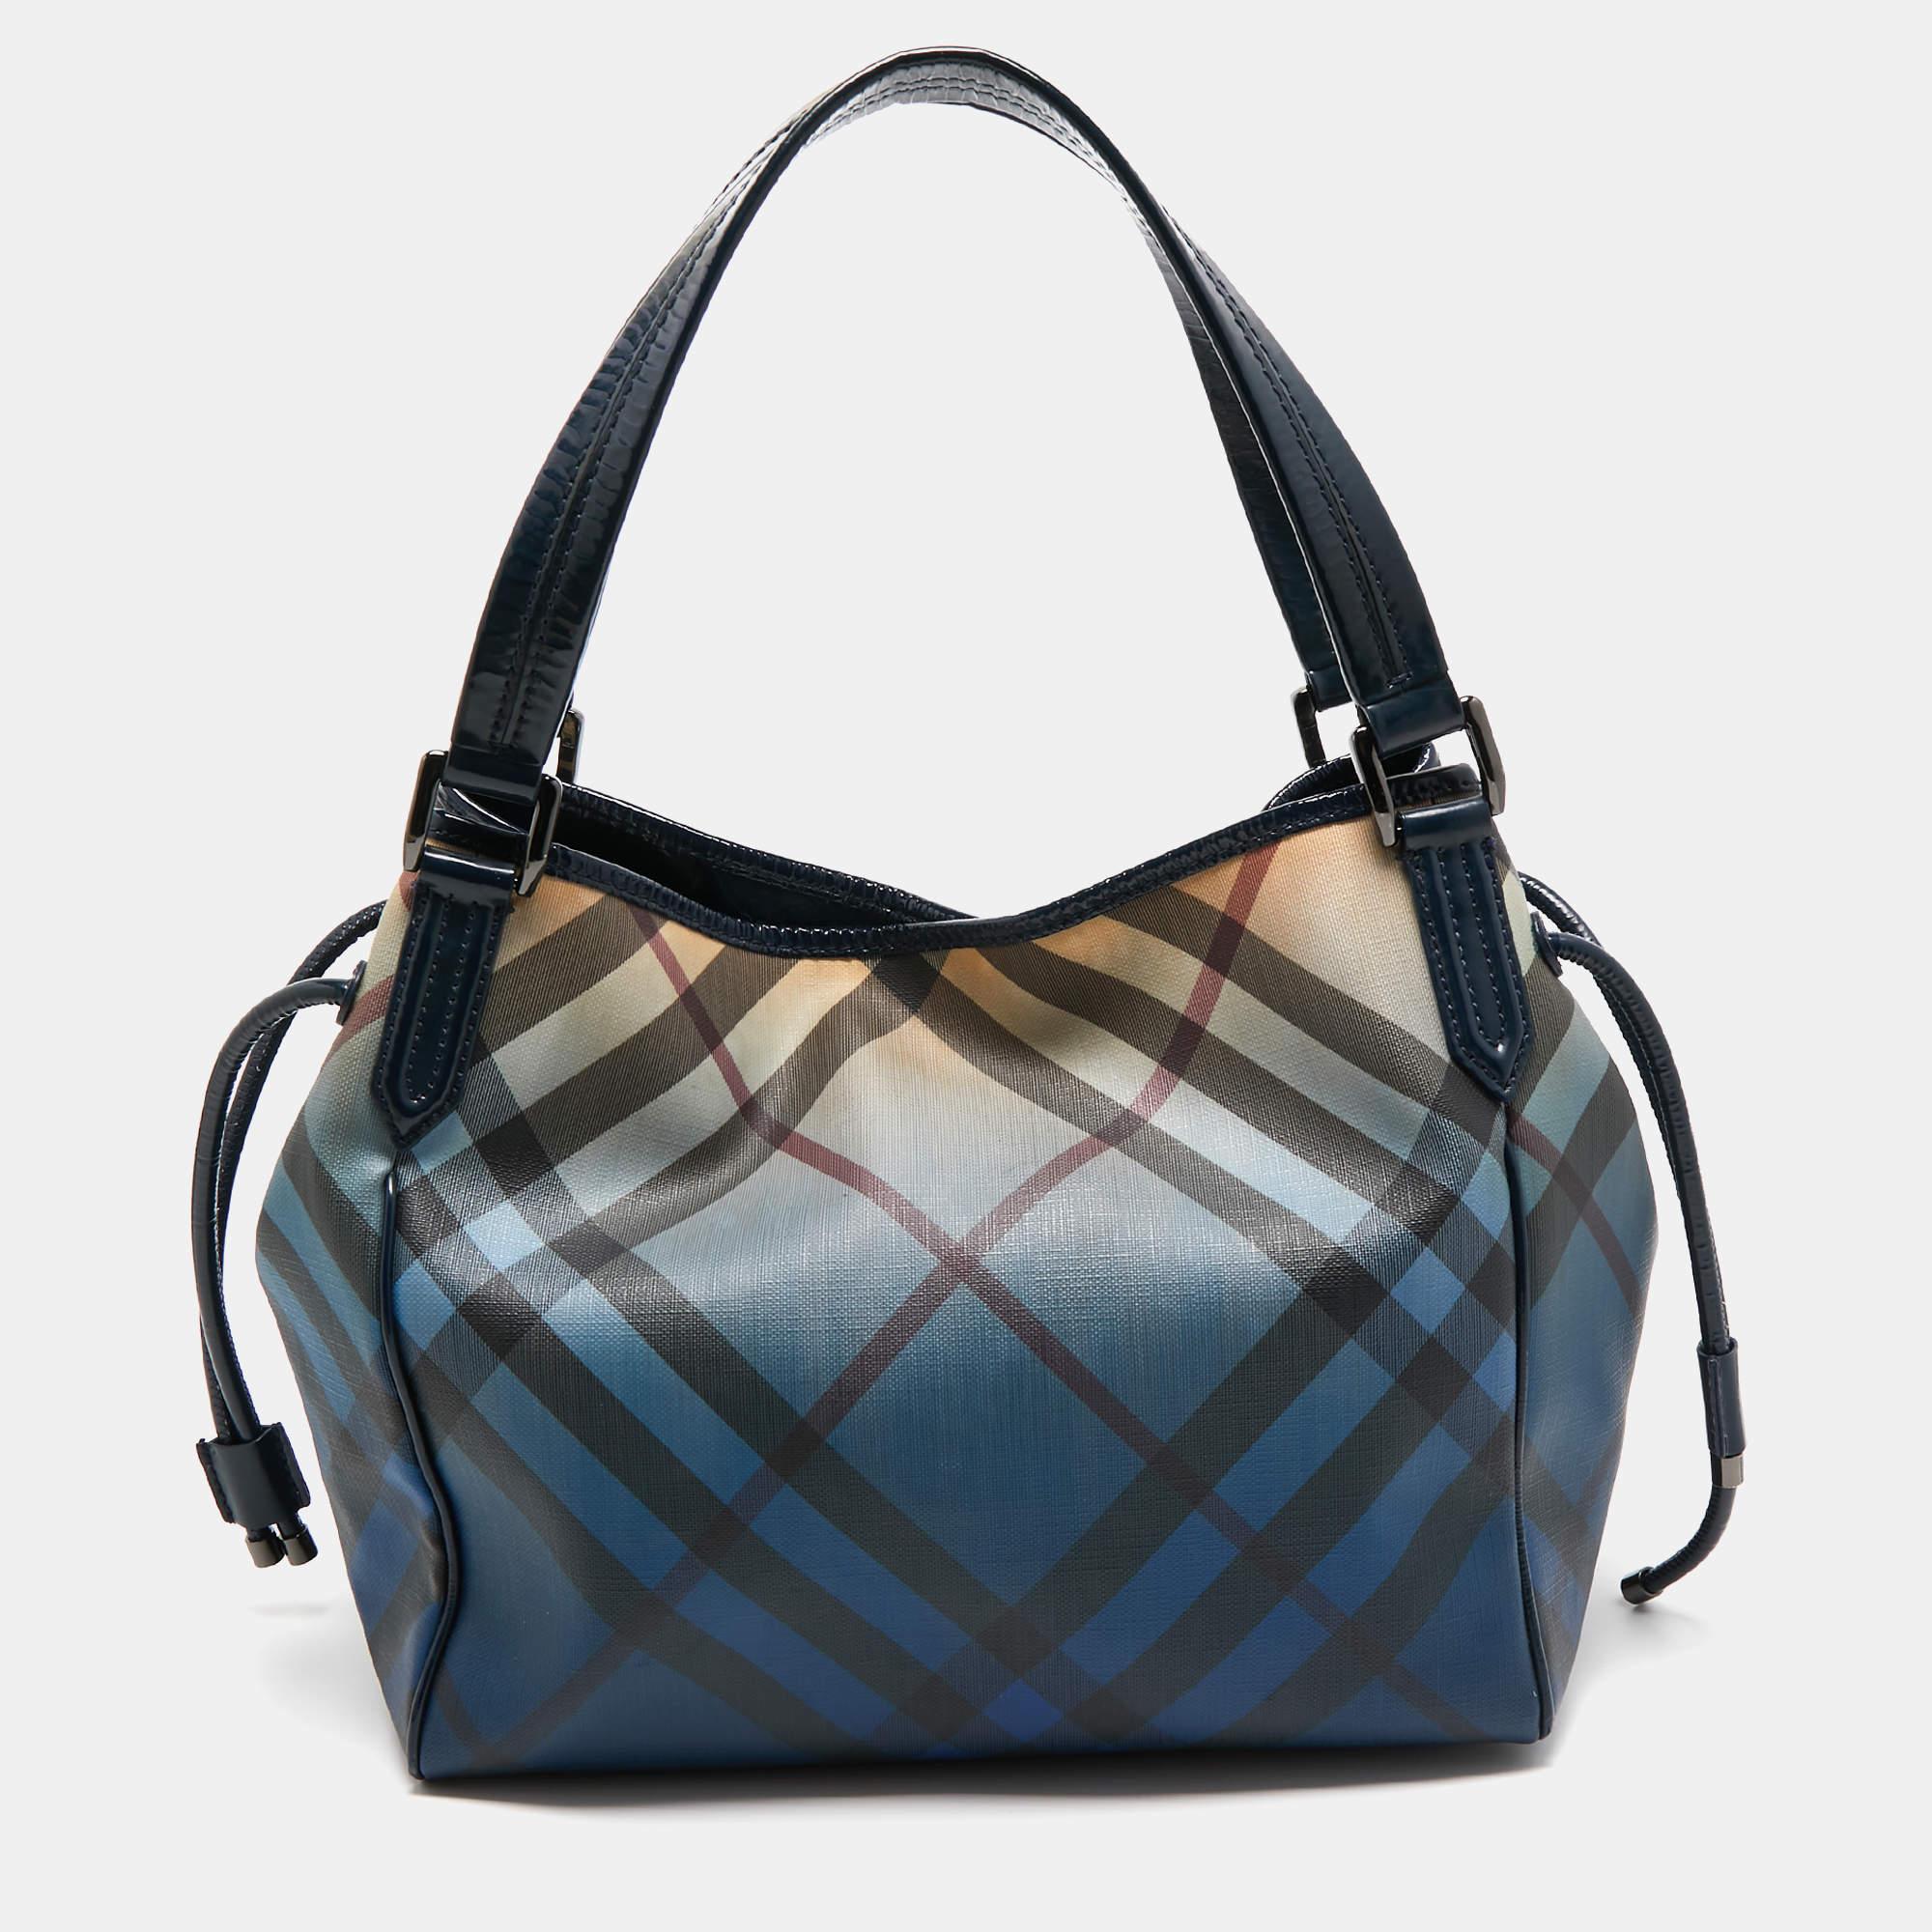 Burberry Navy Blue/Beige Ombre PVC and Patent Leather Biltmore Tote For Sale 7